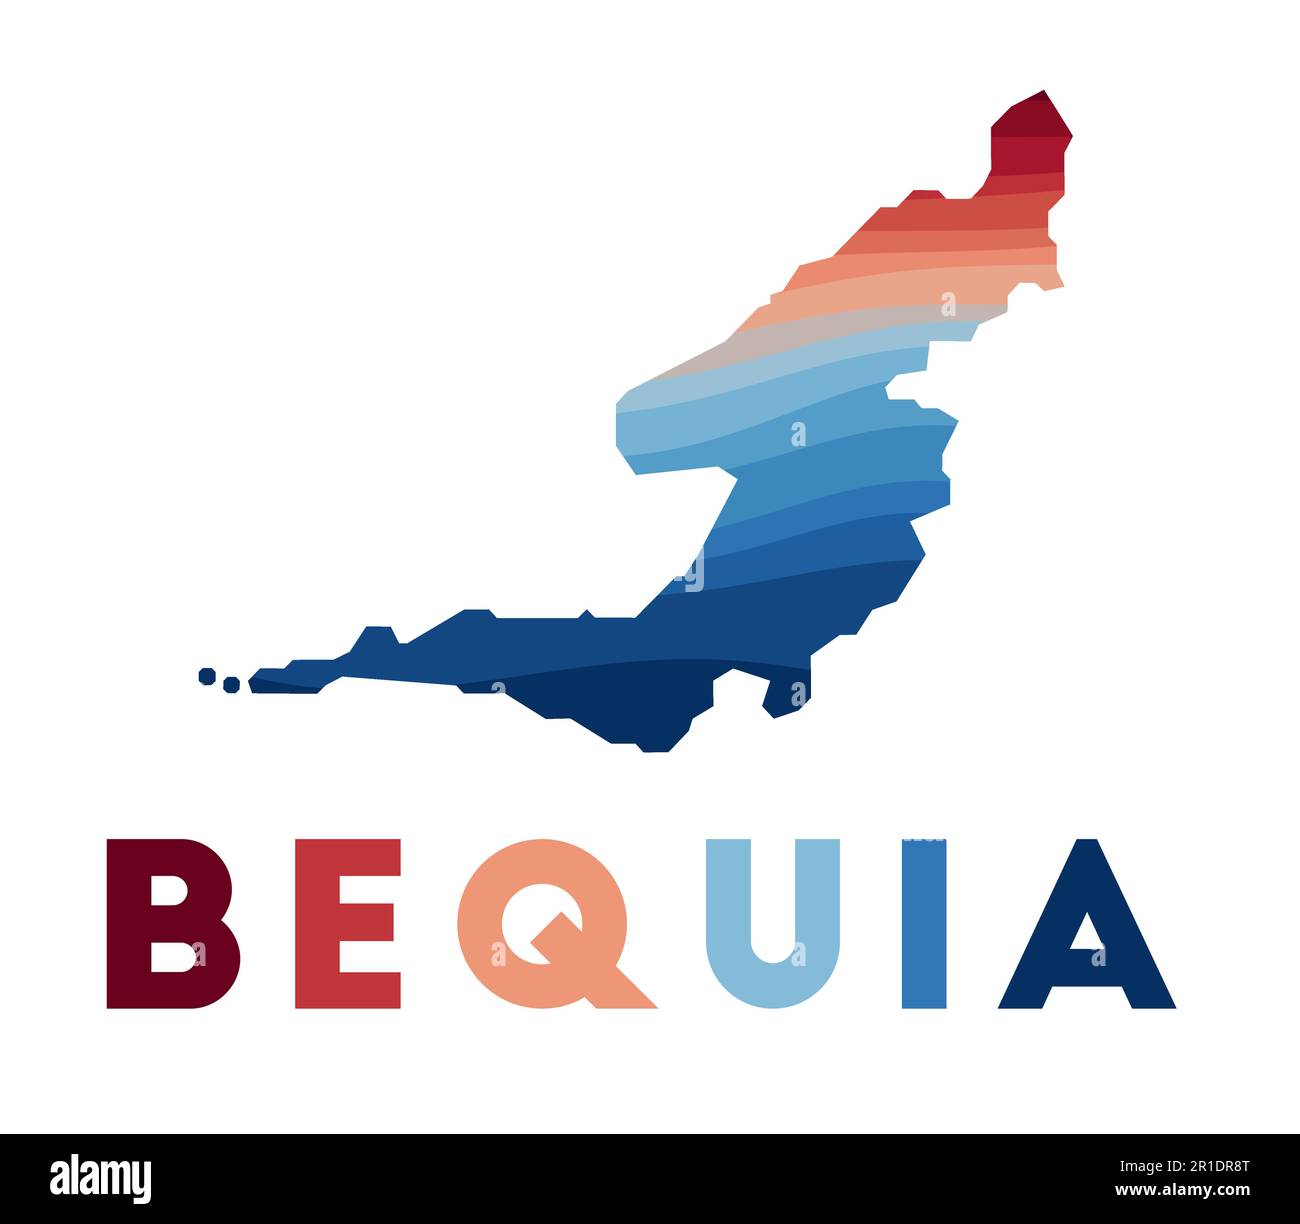 Bequia map. Map of the island with beautiful geometric waves in red blue colors. Vivid Bequia shape. Vector illustration. Stock Vector